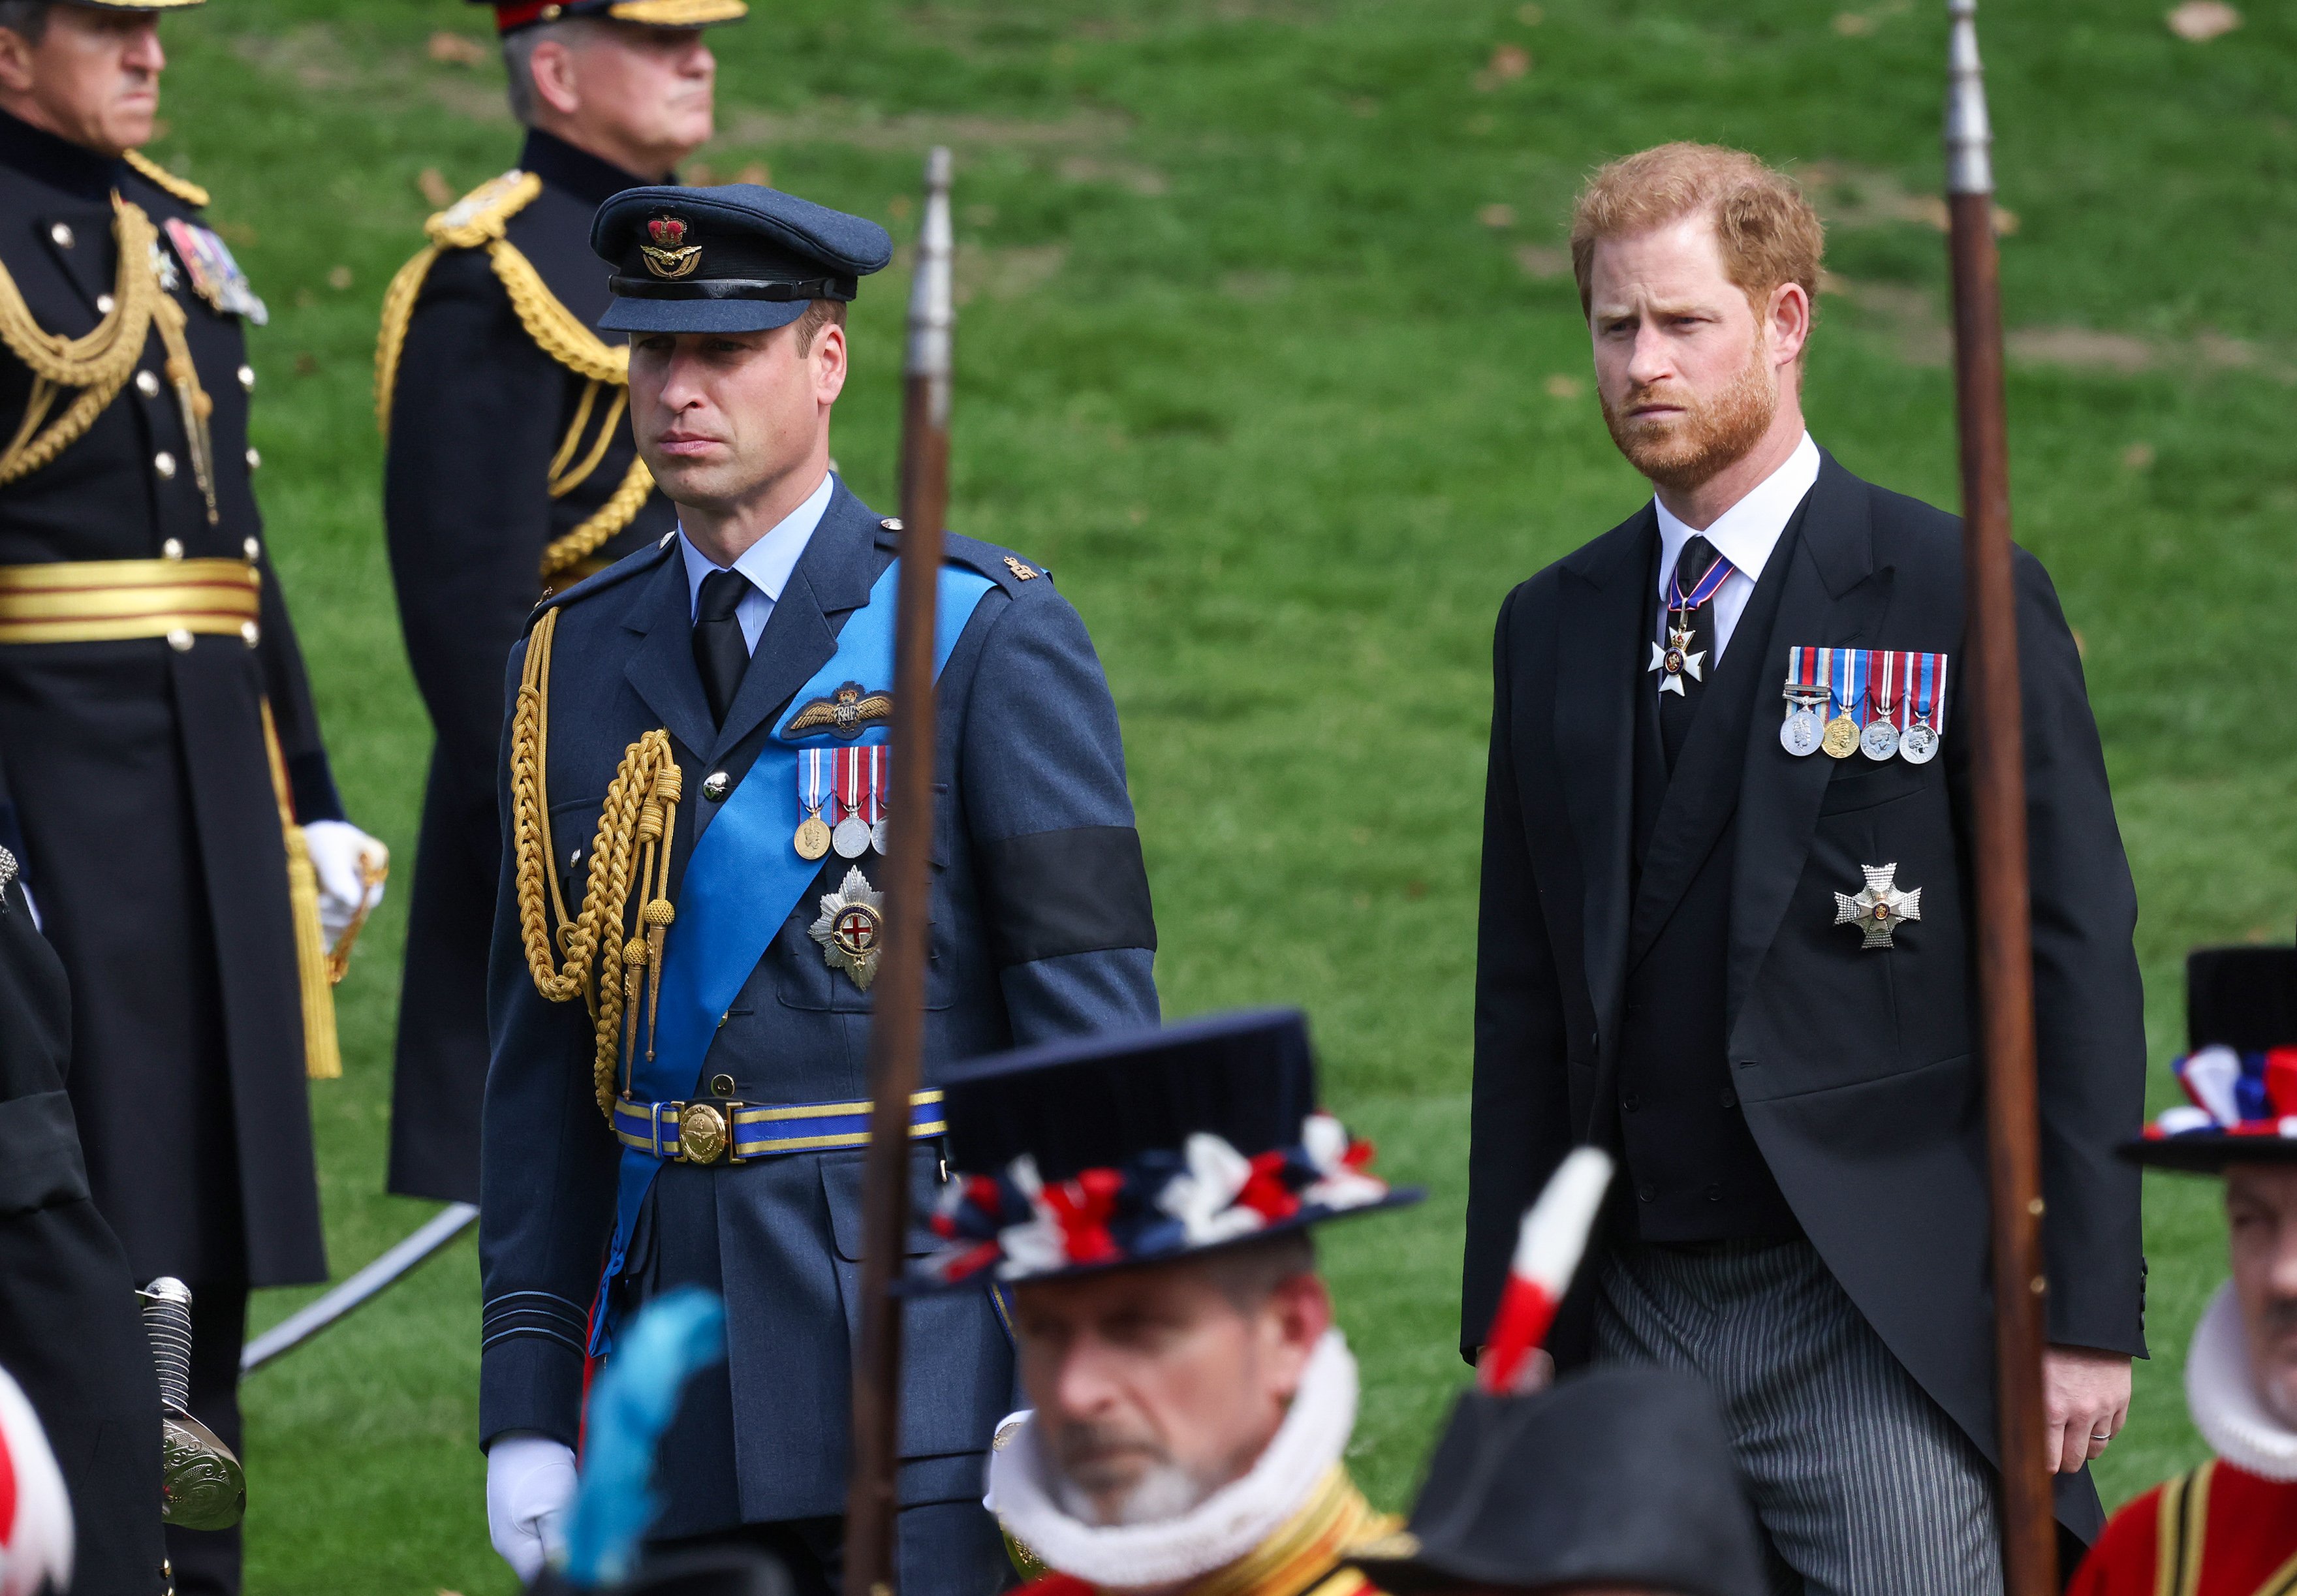 Prince William and Prince Harry and the Queen's state funeral in London 2022. | Source: Getty Images 